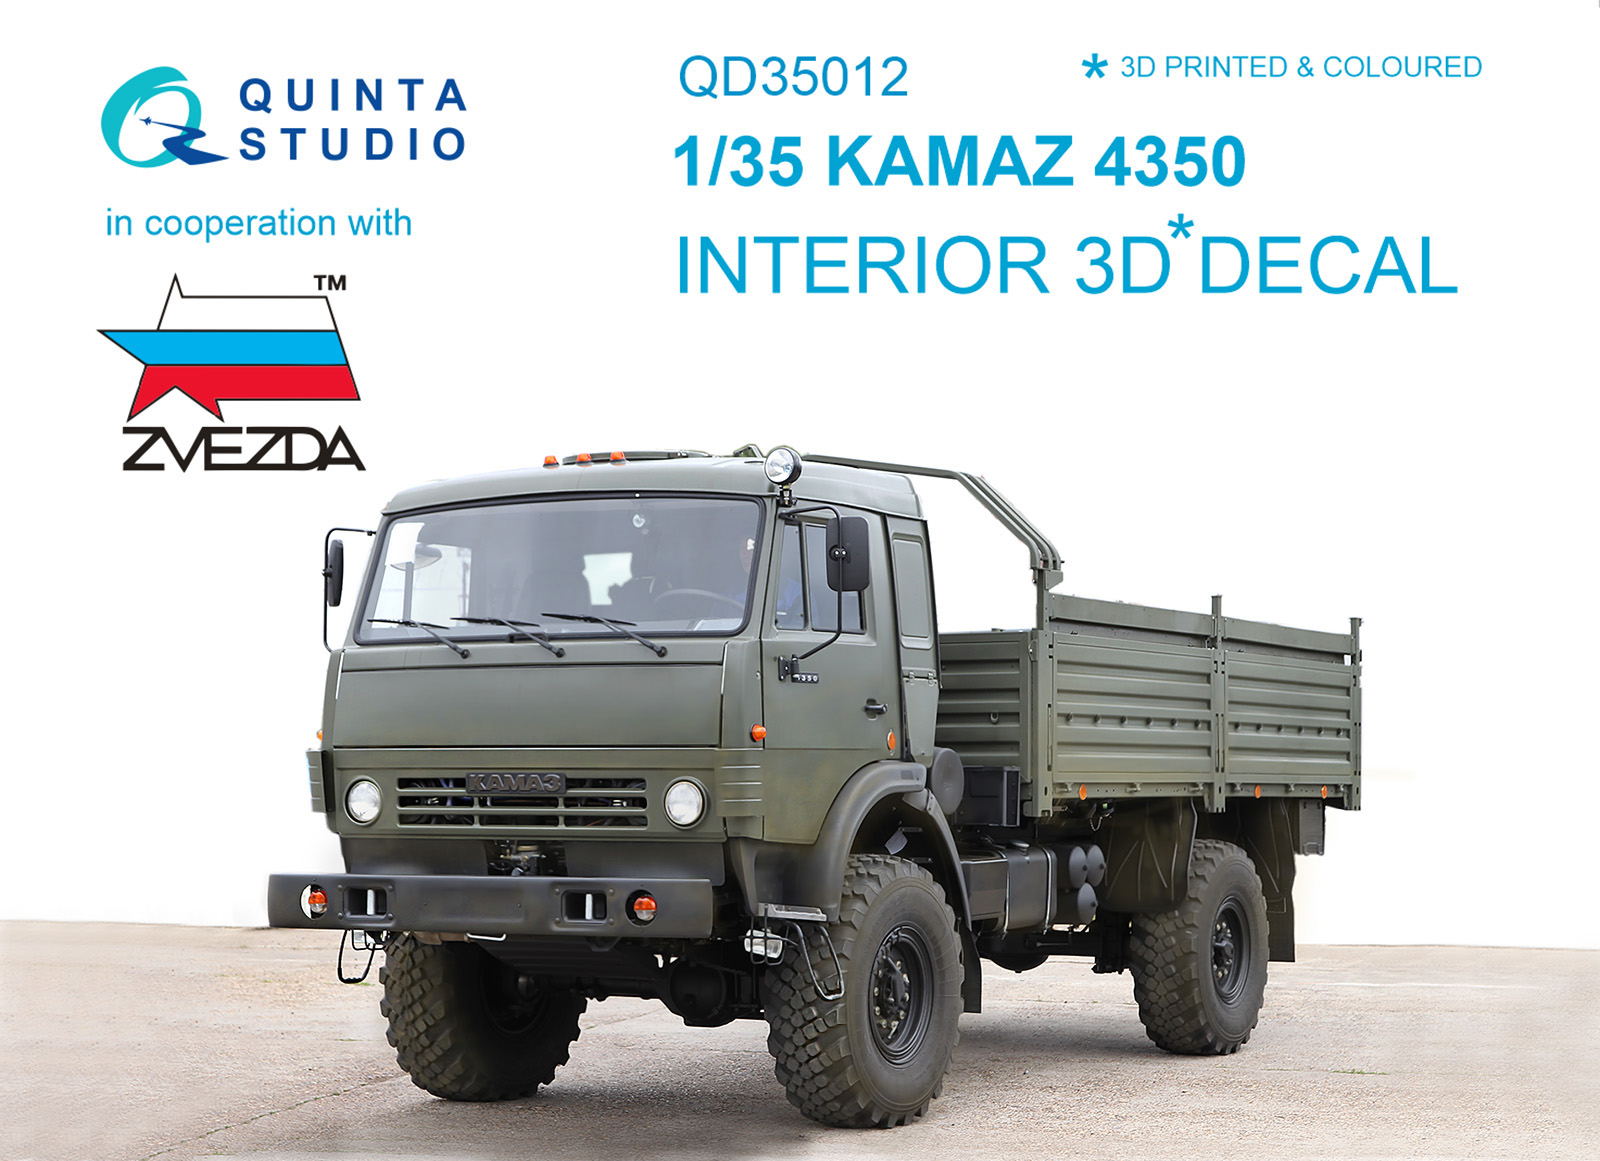 3D Decal of the cab interior for KAMAZ 4350 (for Zvezda model)